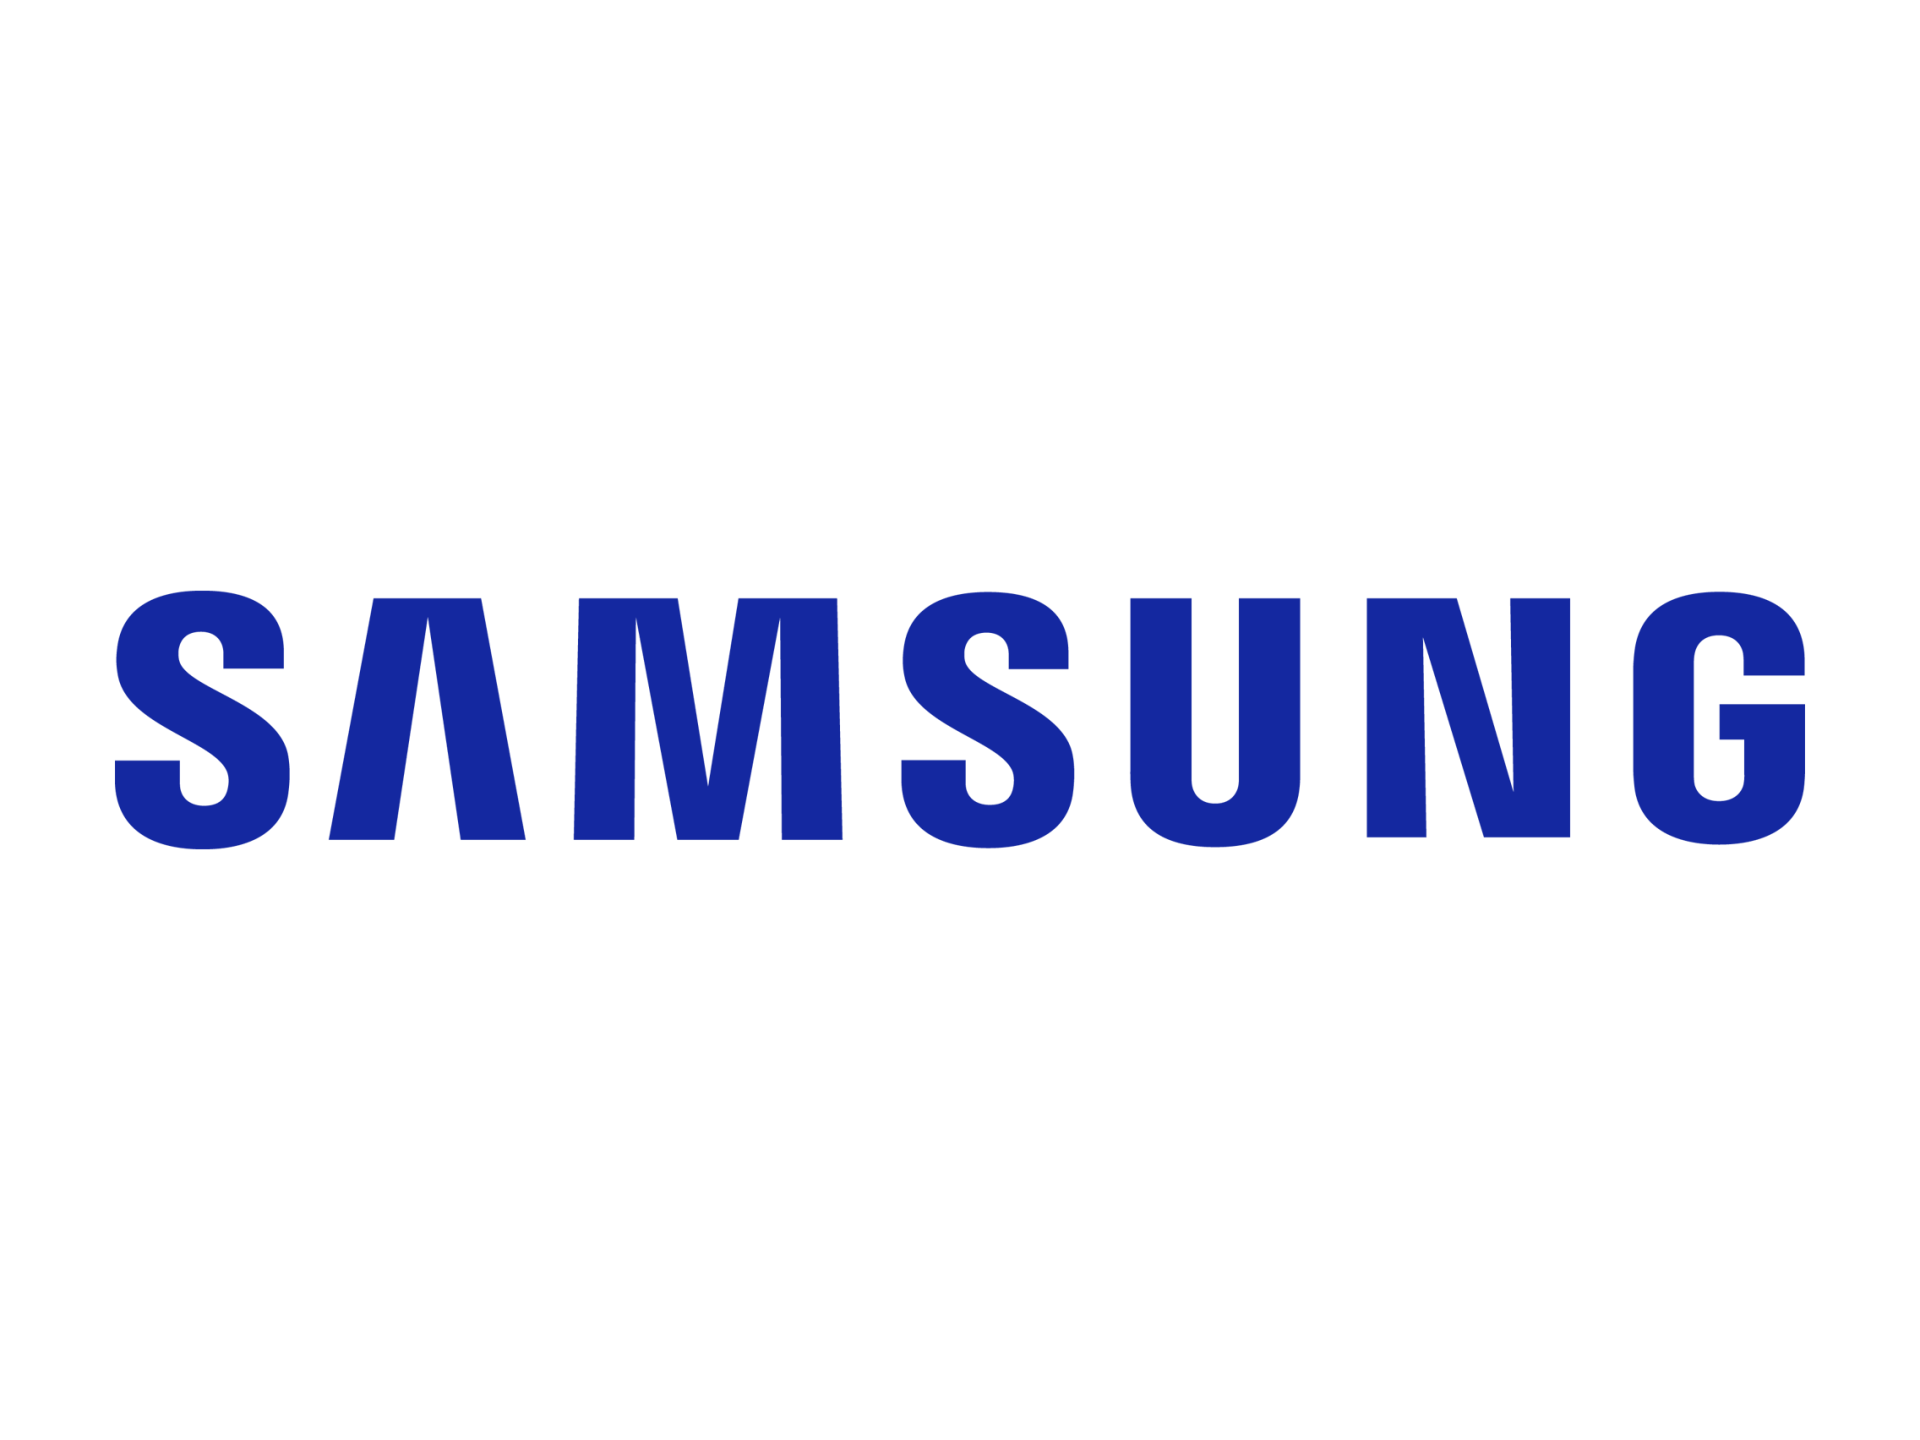 Samsung could become one of Orange's providers for French 5G license